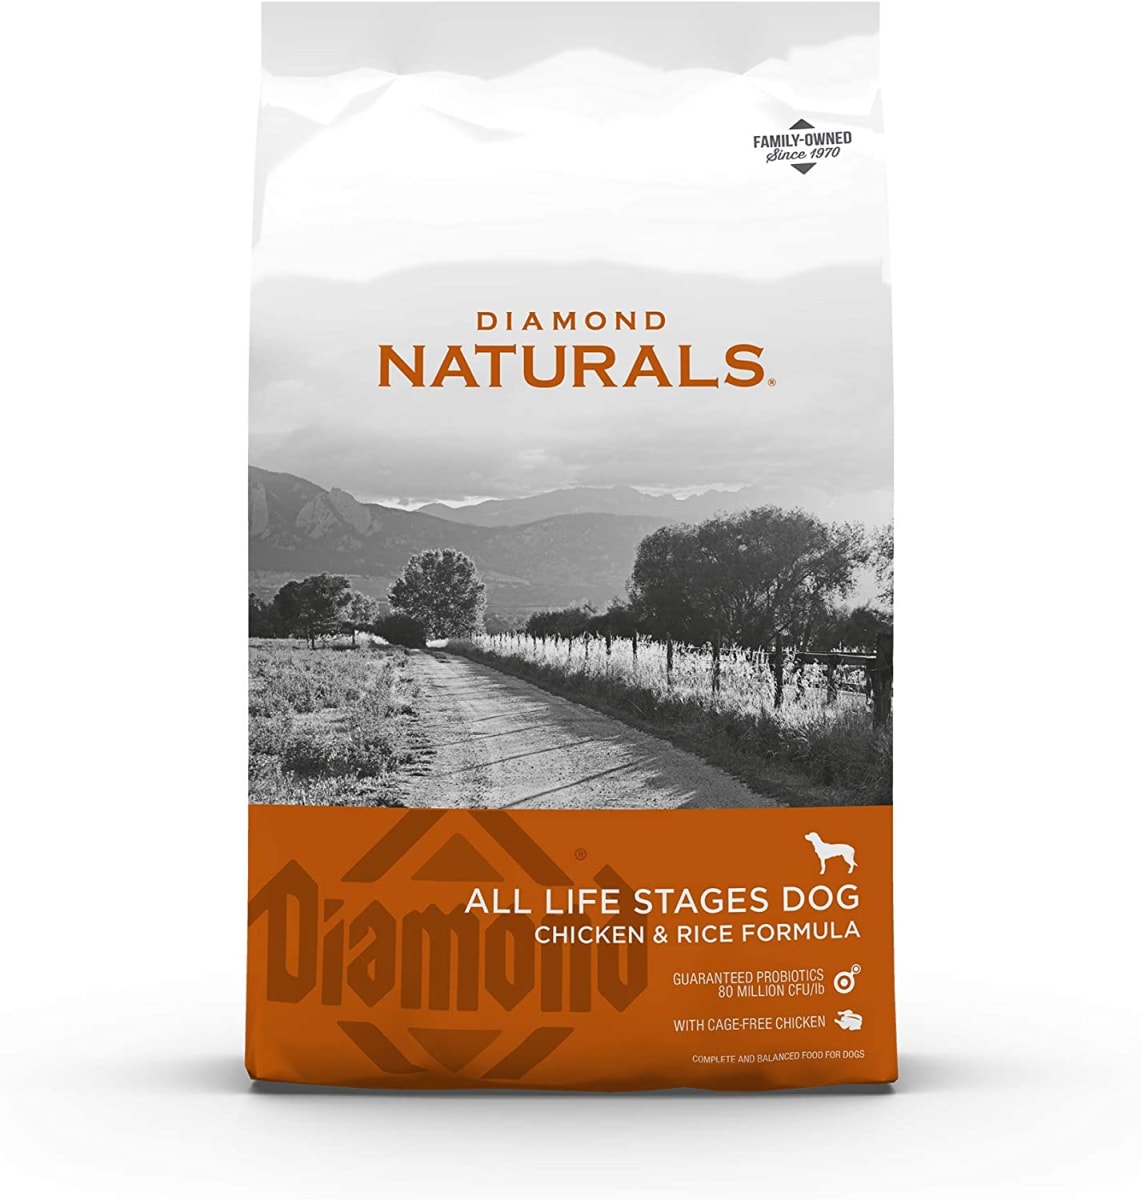 Diamond Naturals All Life Stages Chicken & Rice Formula Dry Dog Food, 40 lb